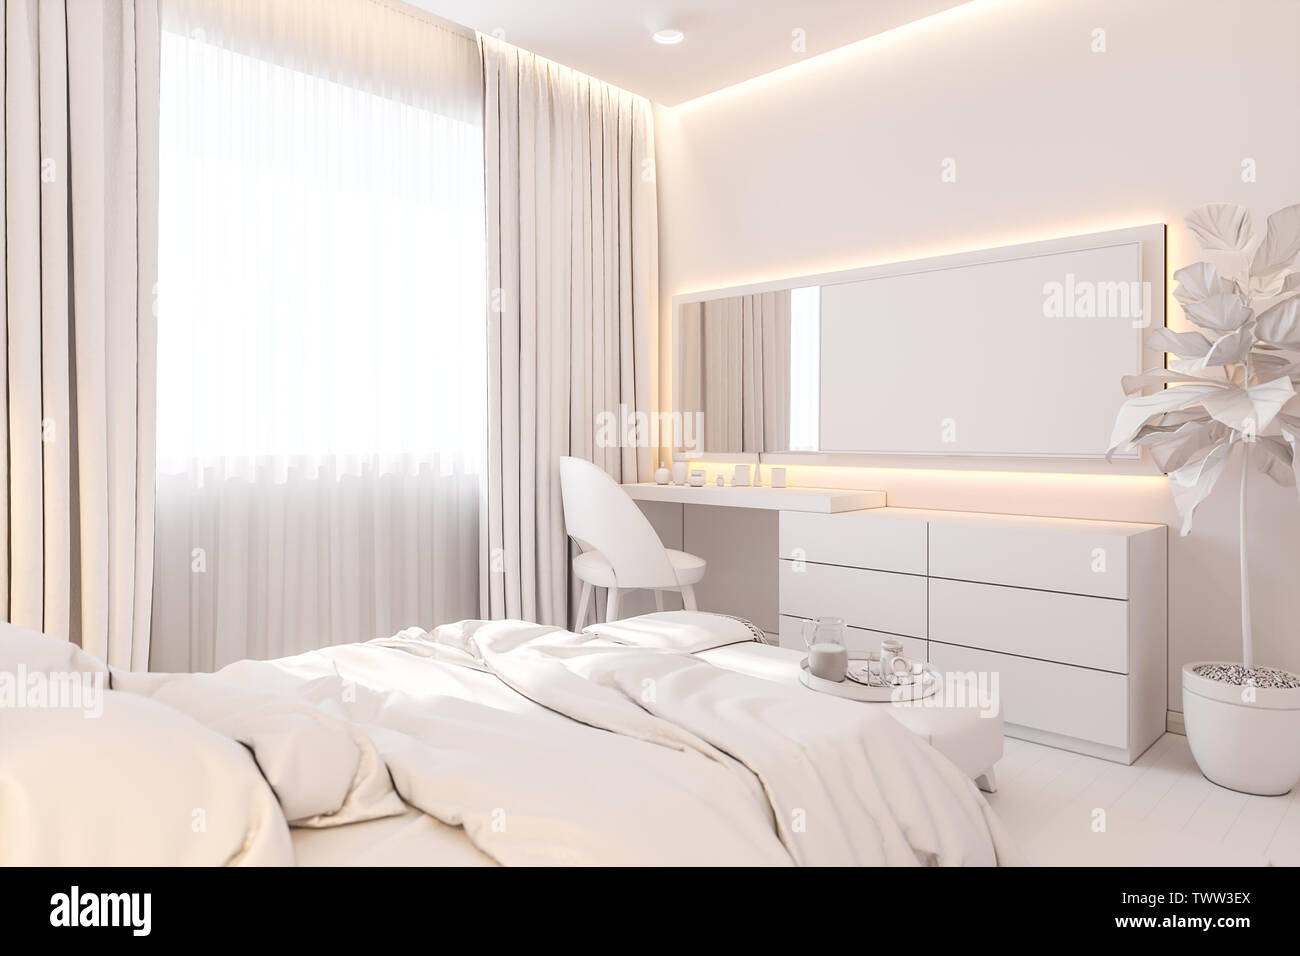 The Interior Design Of The Master Bedroom In The Scandinavian Style 3d Illustration Of The Interior Without Texture In White Color Stock Photo Alamy,Design Your Own Soccer Cleats